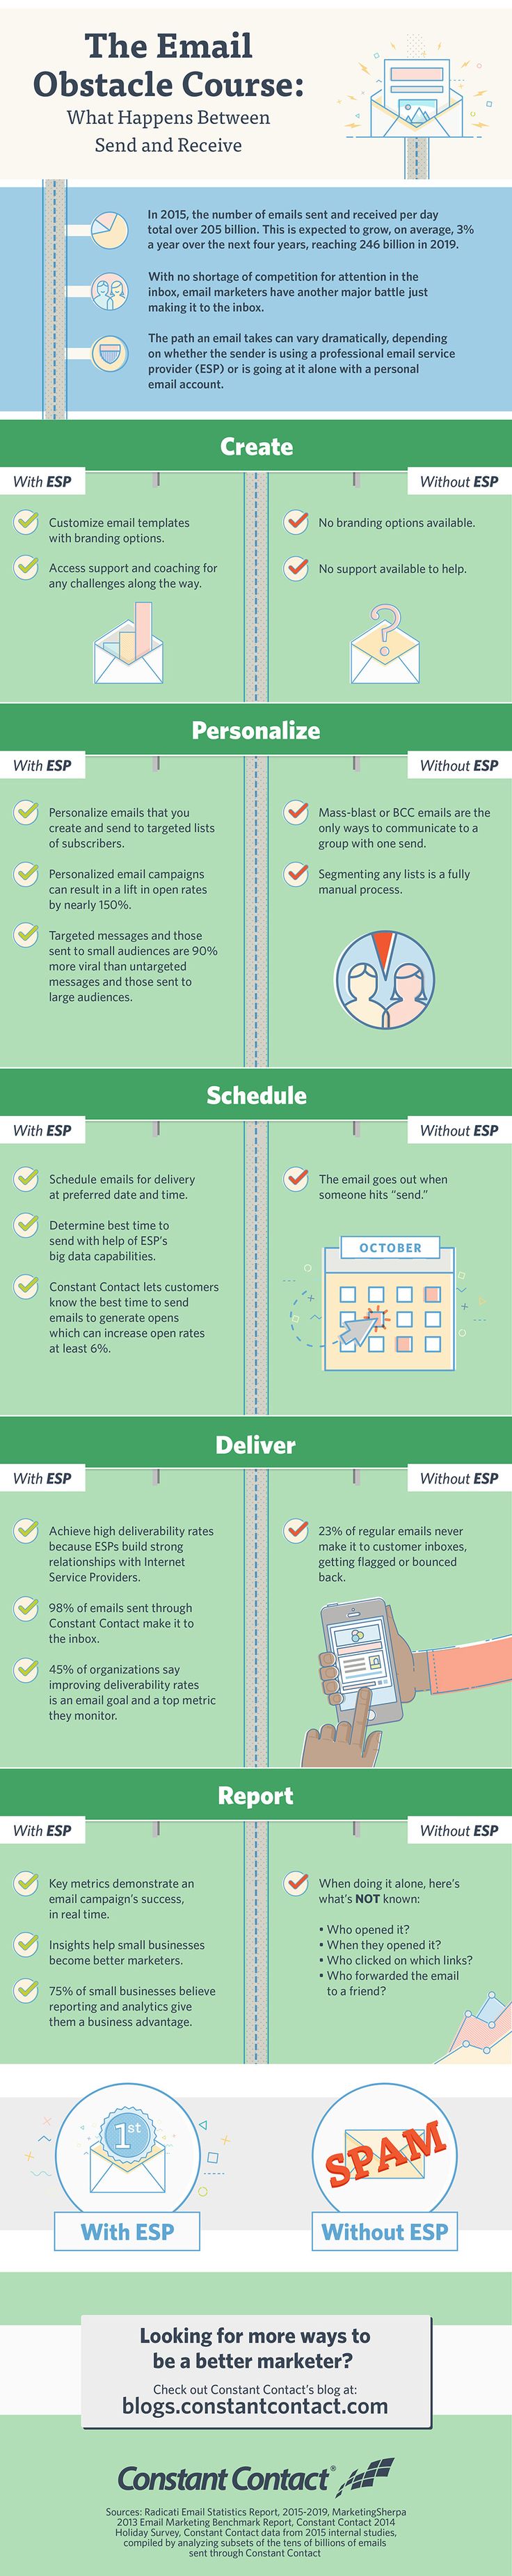 Digital-Marketing-The-Email-Obstacle-Course-What-Happens-Between-Send-and-Receive-Infographic-E Digital Marketing : The Email Obstacle Course: What Happens Between Send and Receive #Infographic #E...